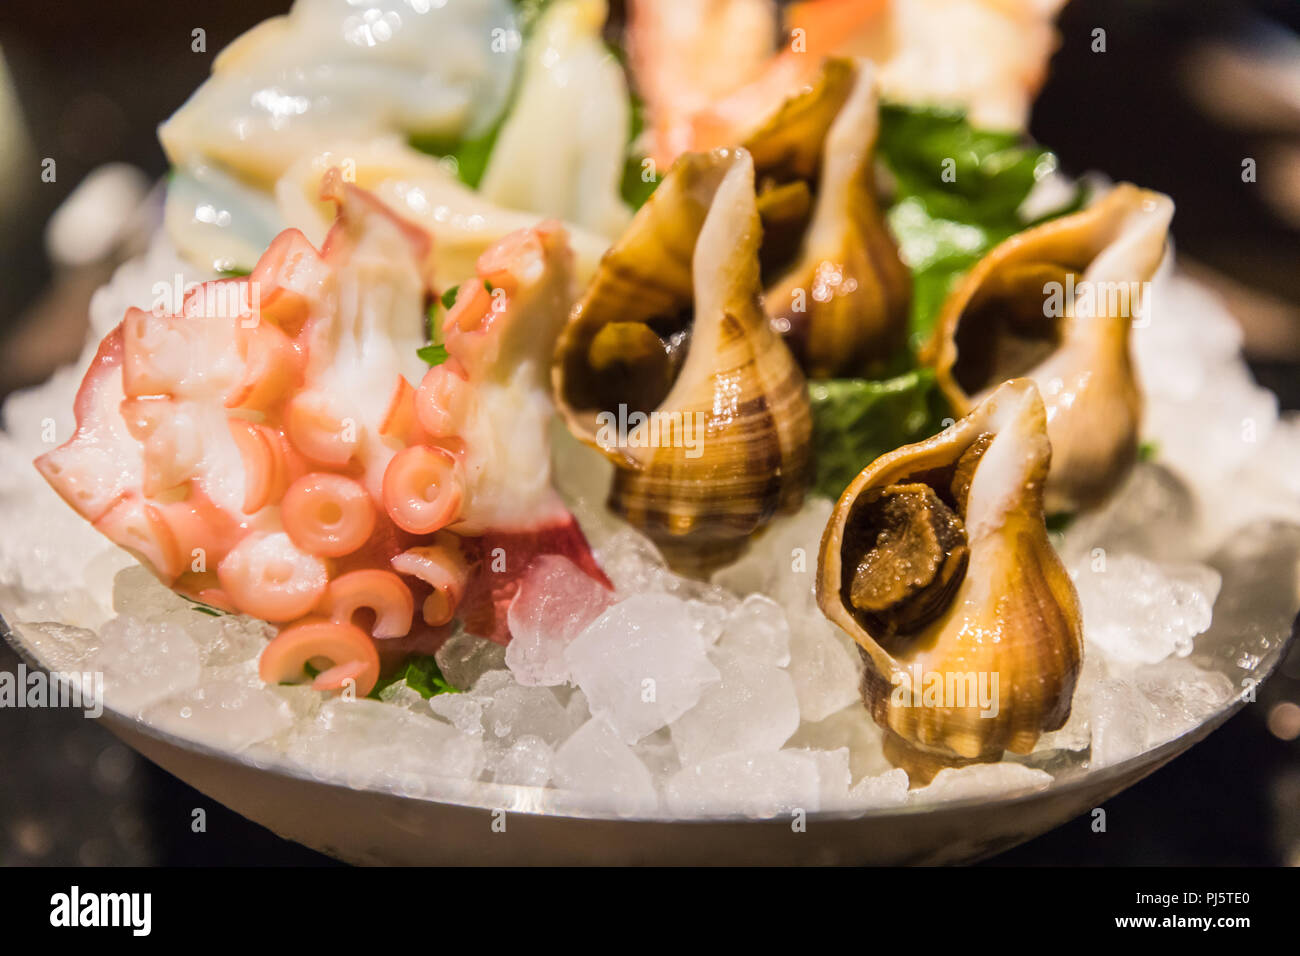 Closeup view of typical Japanese food Sashimi,  a Japanese delicacy consisting of very fresh raw meat, fish, seafood sliced into thin pieces. Stock Photo